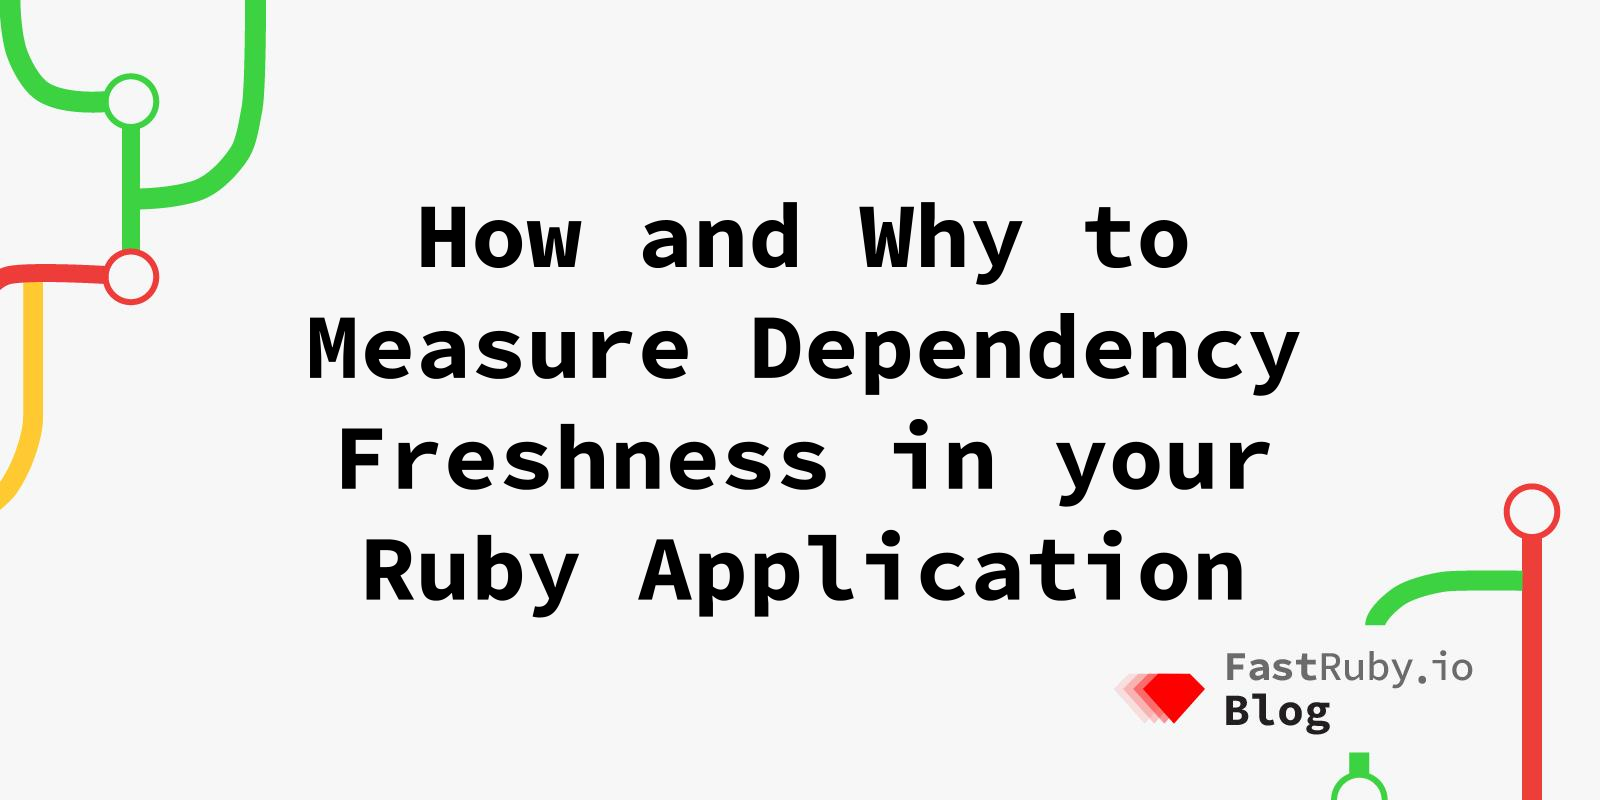 How and Why to Measure Dependency Freshness in your Ruby Application